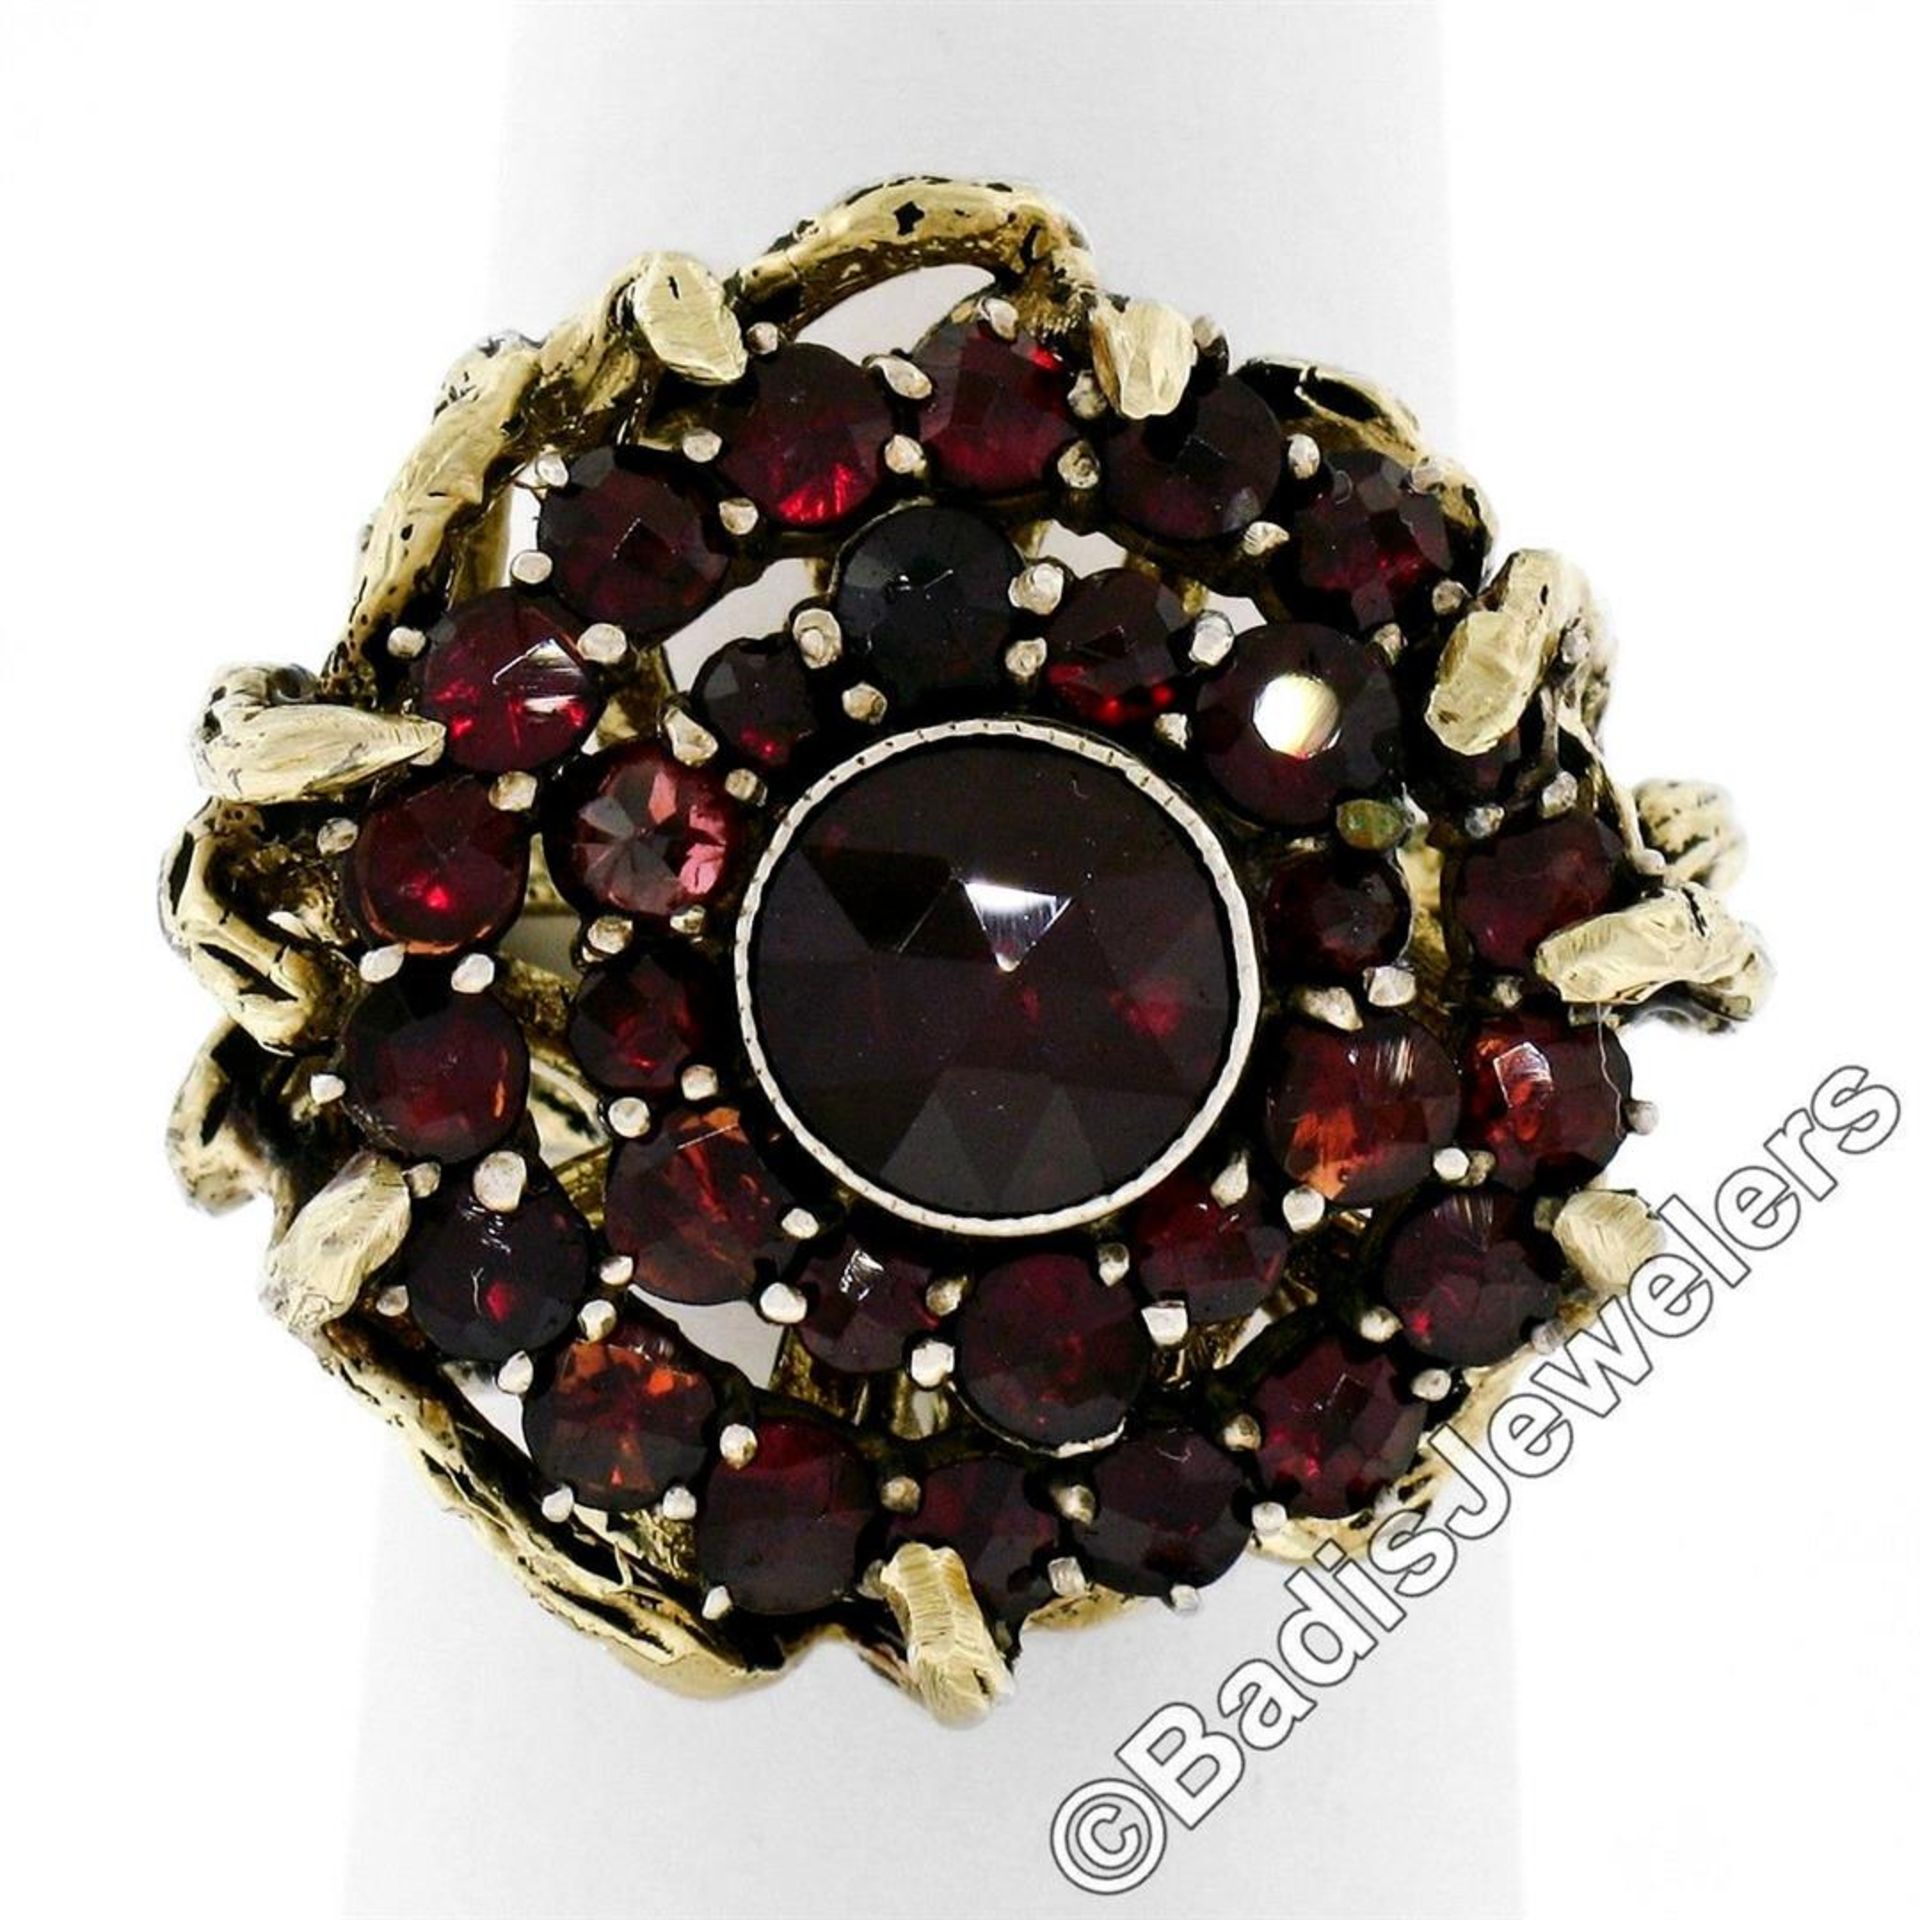 Vintage 14kt Yellow Gold and Silver Top Old Cut Garnet Cluster Ring - Image 3 of 9